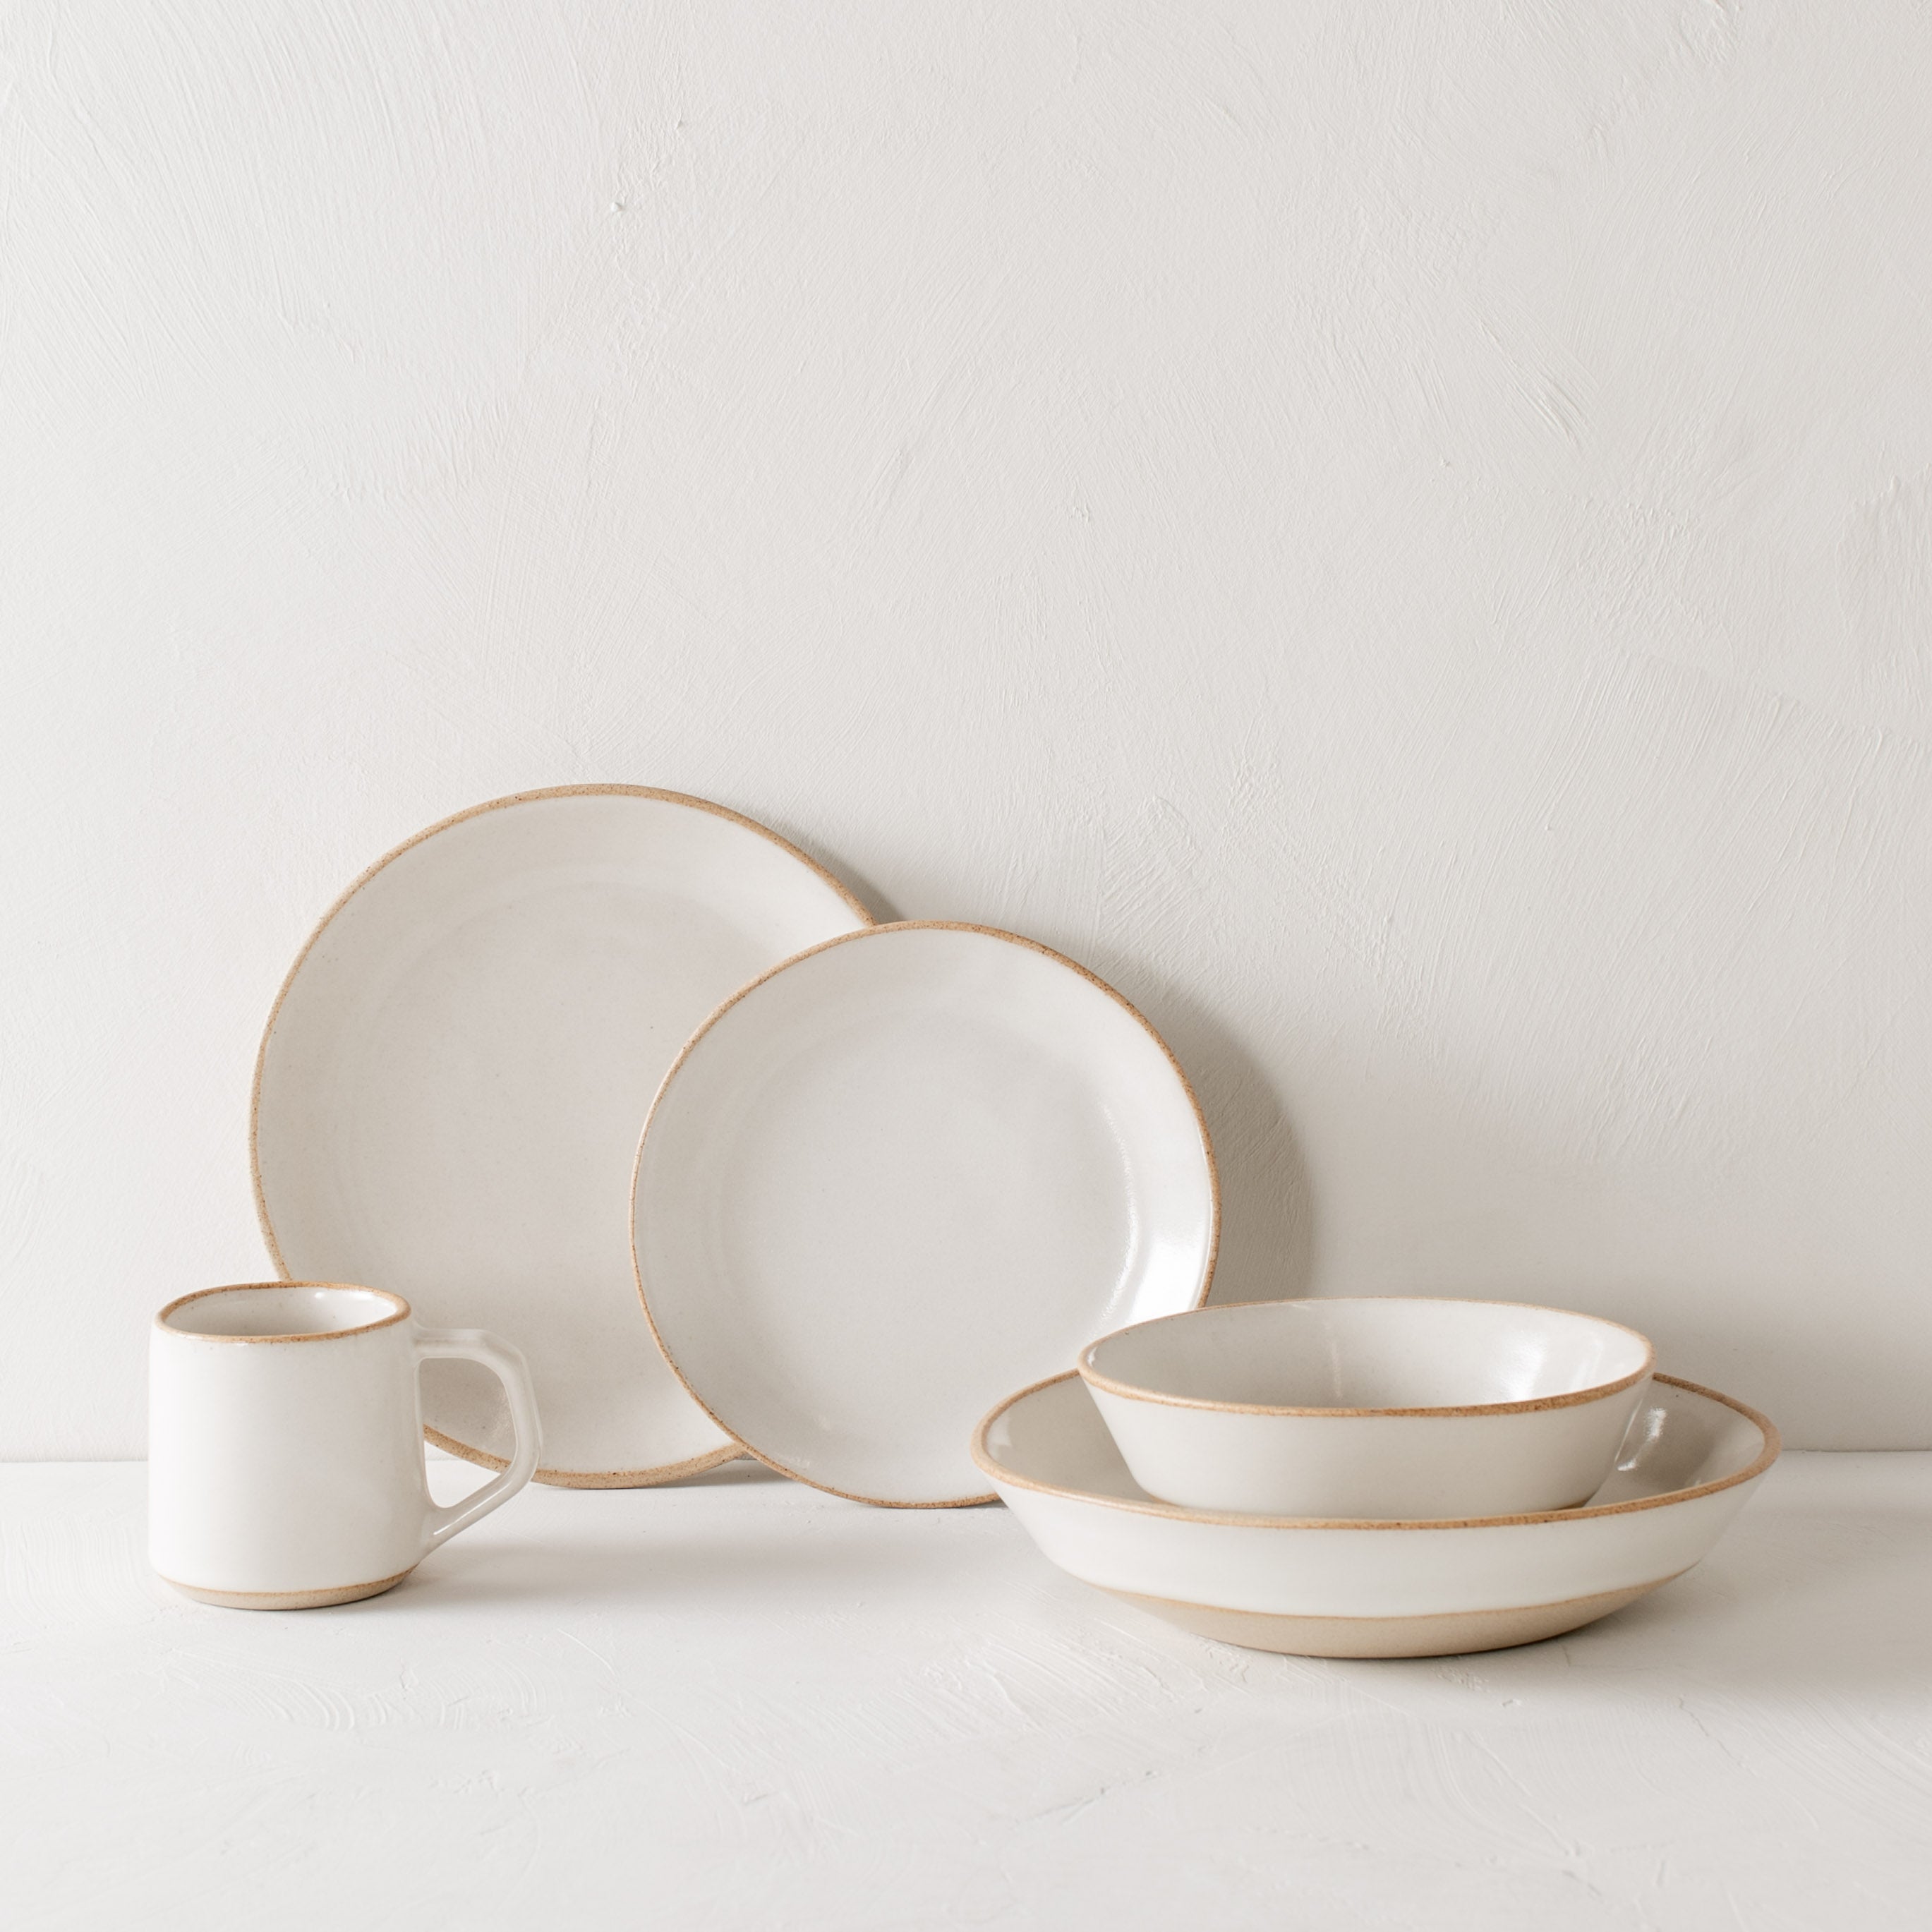 Full ceramic dinnerware set, exposed stoneware rims and bases. All items stylized and stacked overlapping other stacked products. From left to right, minimal mug, dinner and salad plate leaning against white textured wall, minimal bowl nested in pasta bowl. Handmade ceramic dining set designed and sold by Convivial Production, Kansas City ceramics.